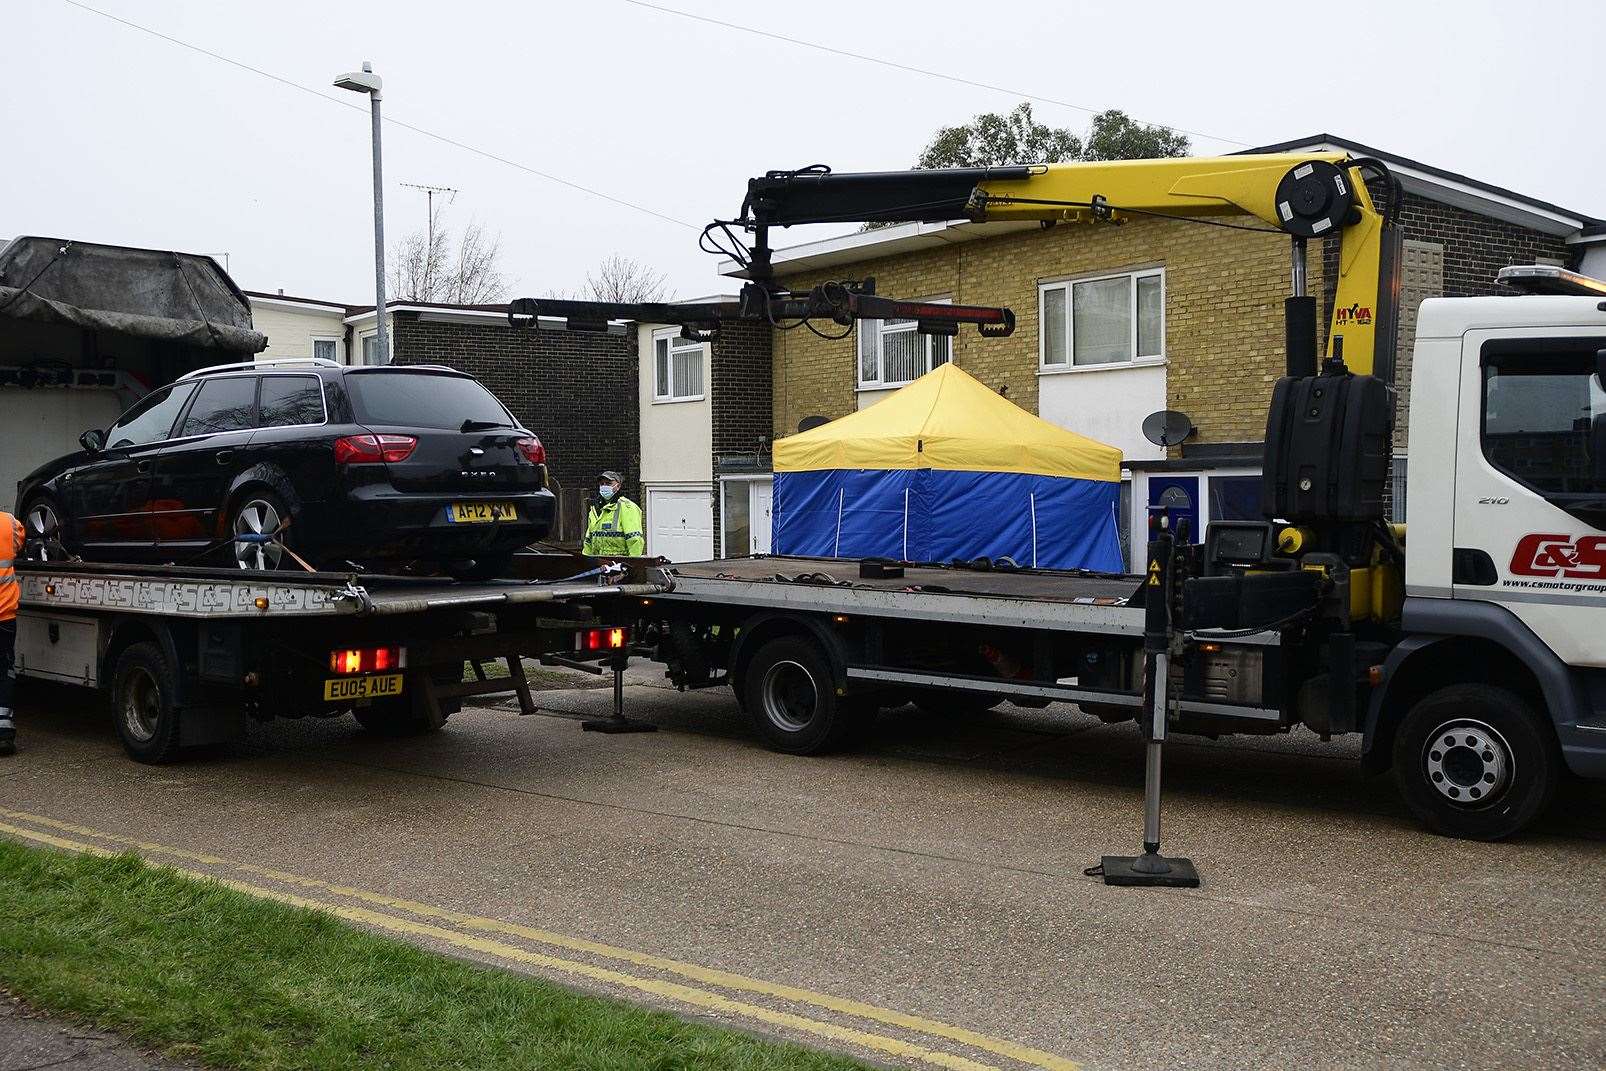 Police search for Sarah Everard removed vehicles at Freemens Way, Deal. Picture: Barry Goodwin